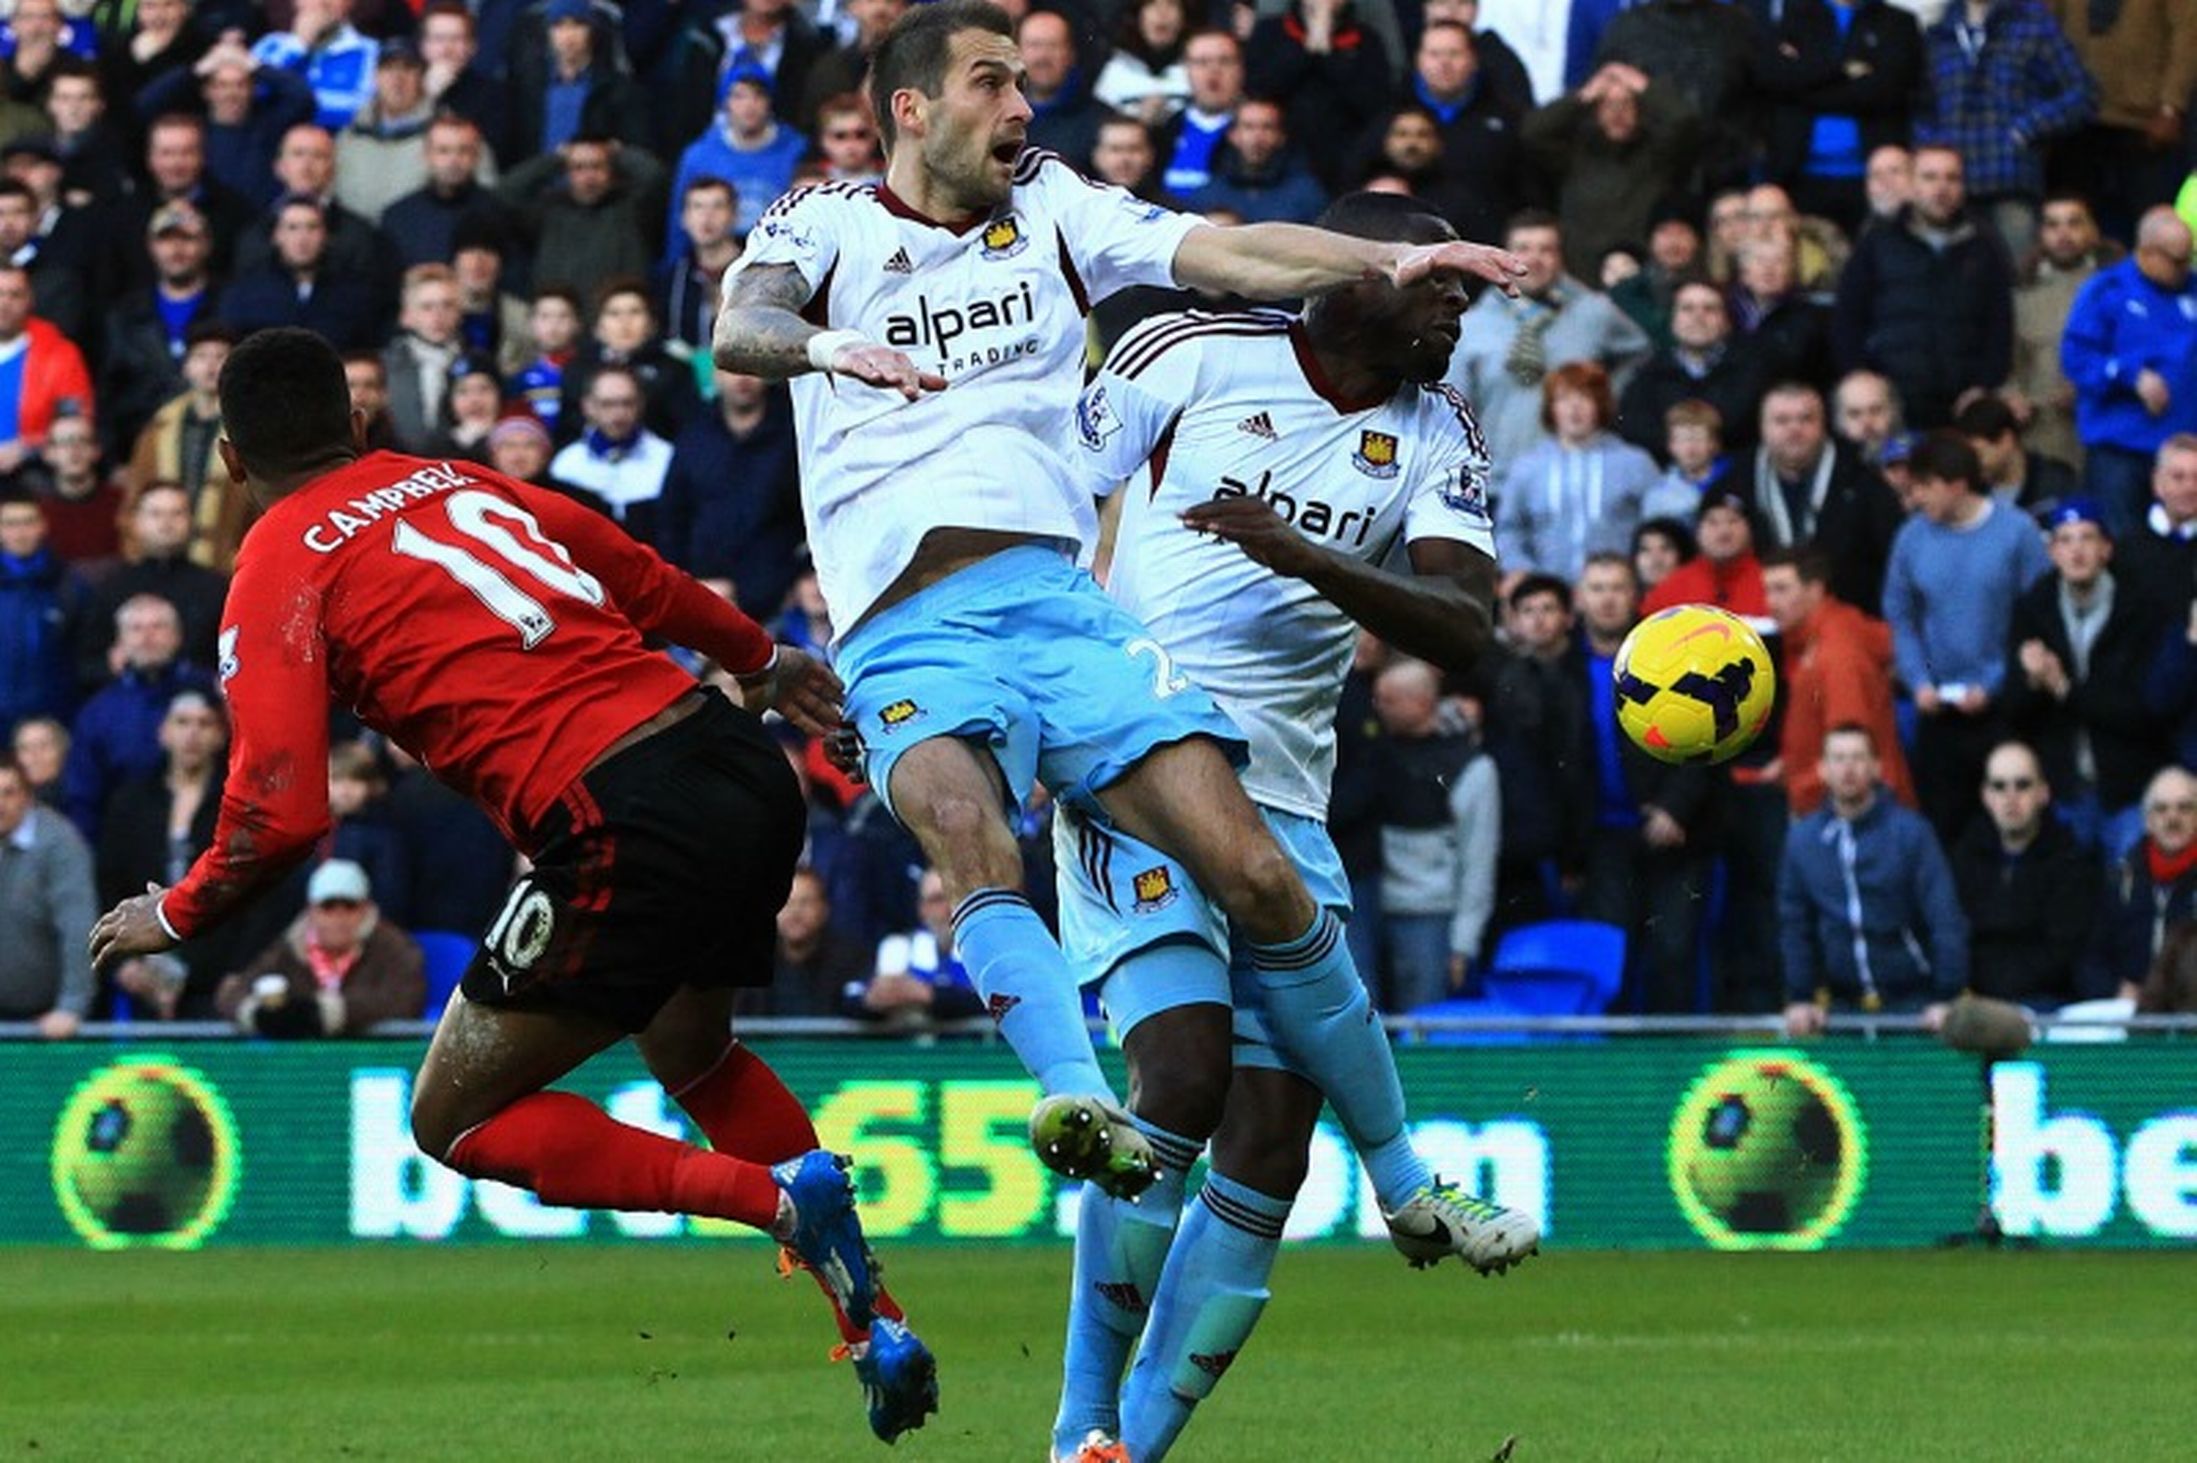 The incident where West Ham right Guy Demel was concussed by team mate Roger Johnson - Johnson did well on his return to Cardiff, but City's unimaginative attacking played into his hands.*